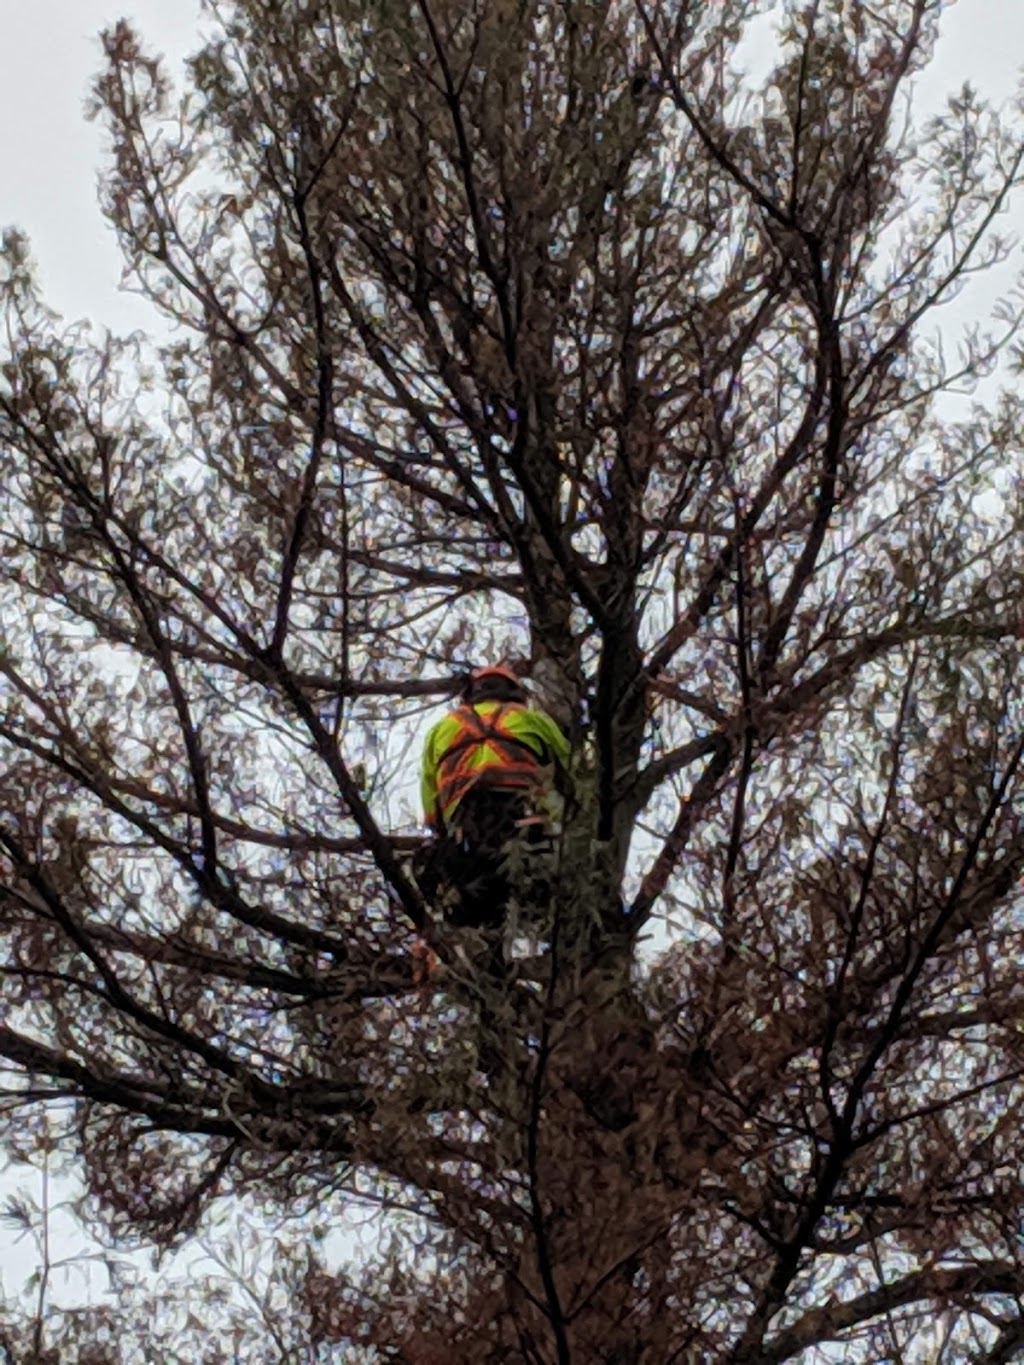 Tylers Tree Services | 7854 Yonge St, Innisfil, ON L9S 1L4, Canada | Phone: (705) 717-8357